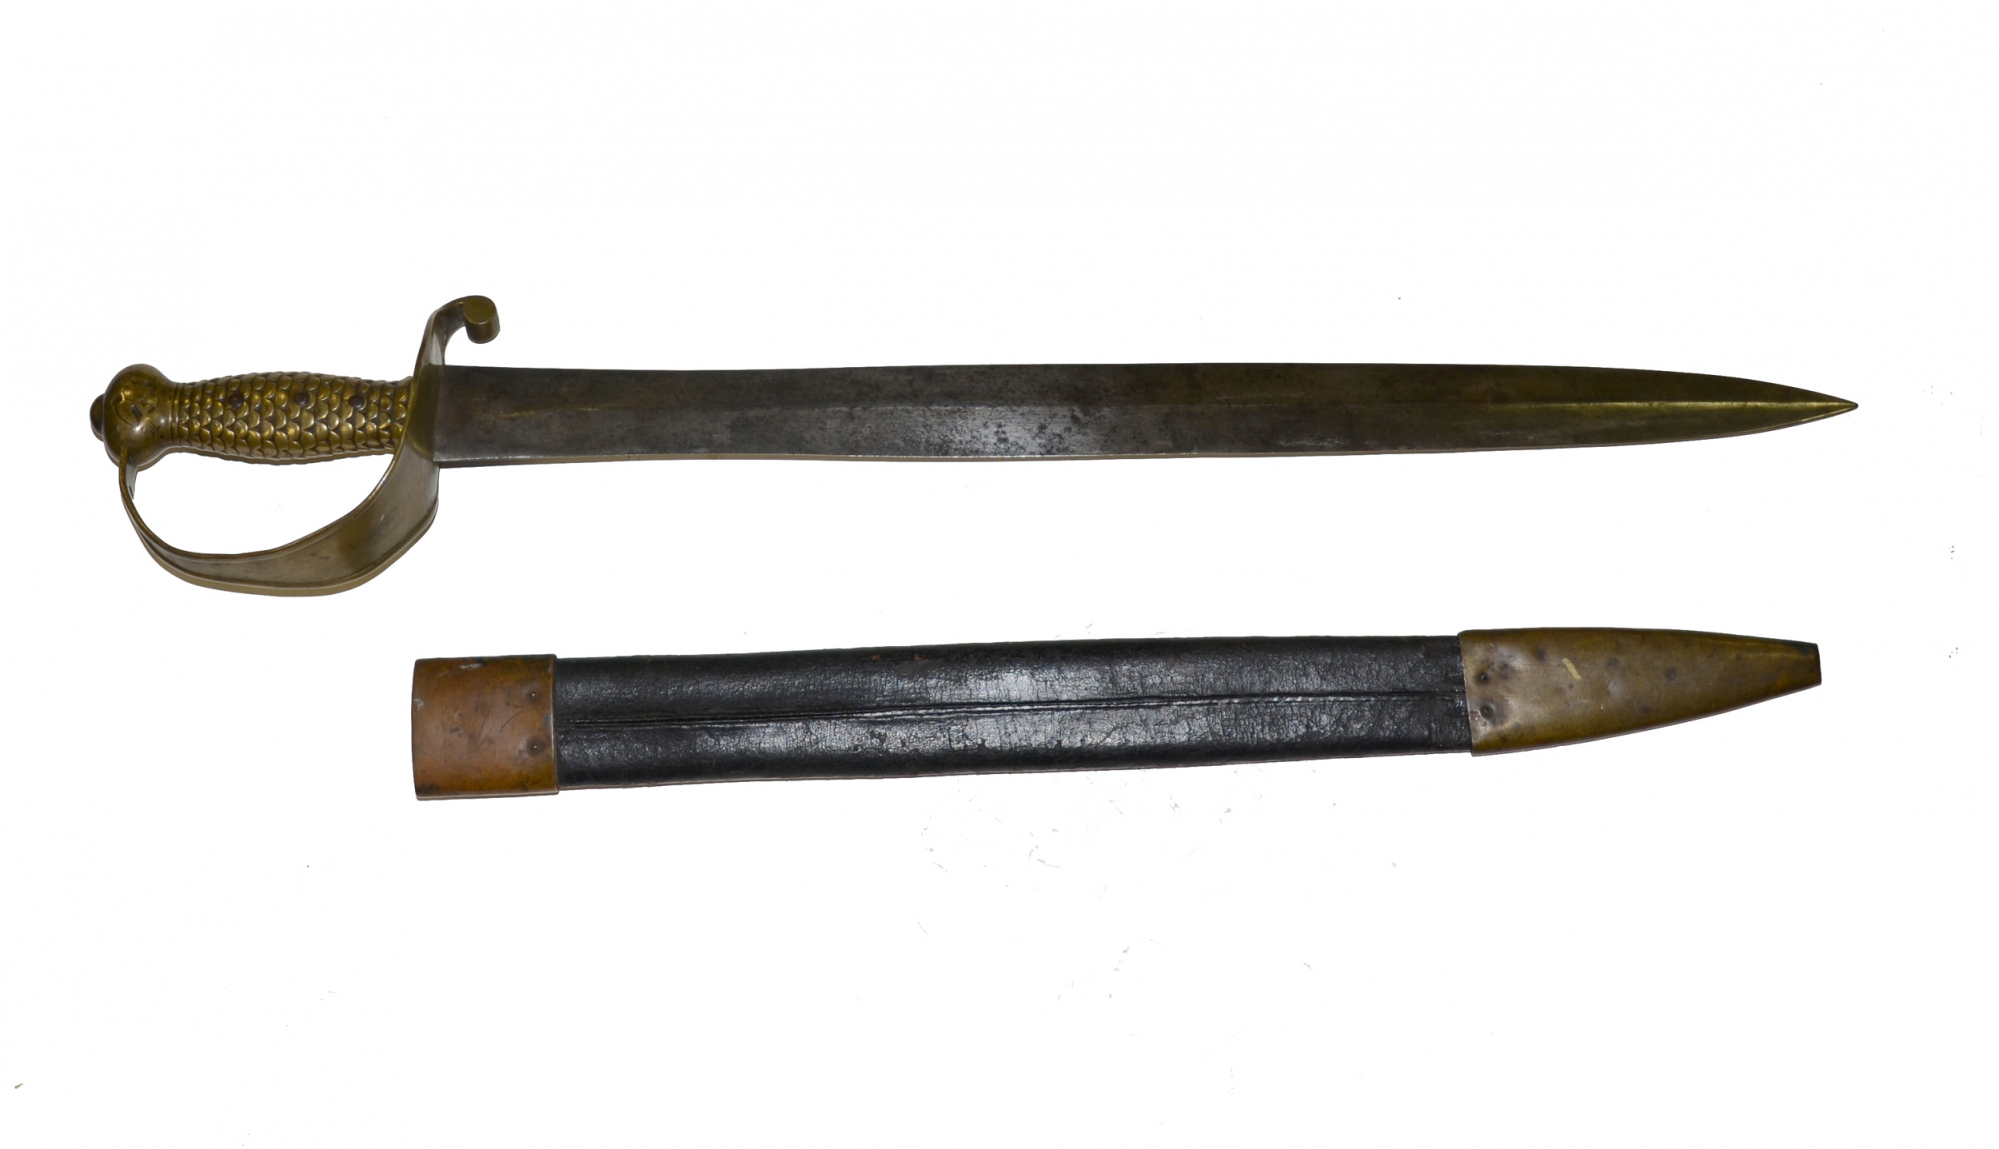 MODEL 1841 NAVAL CUTLASS BY AMES, DATED 1842